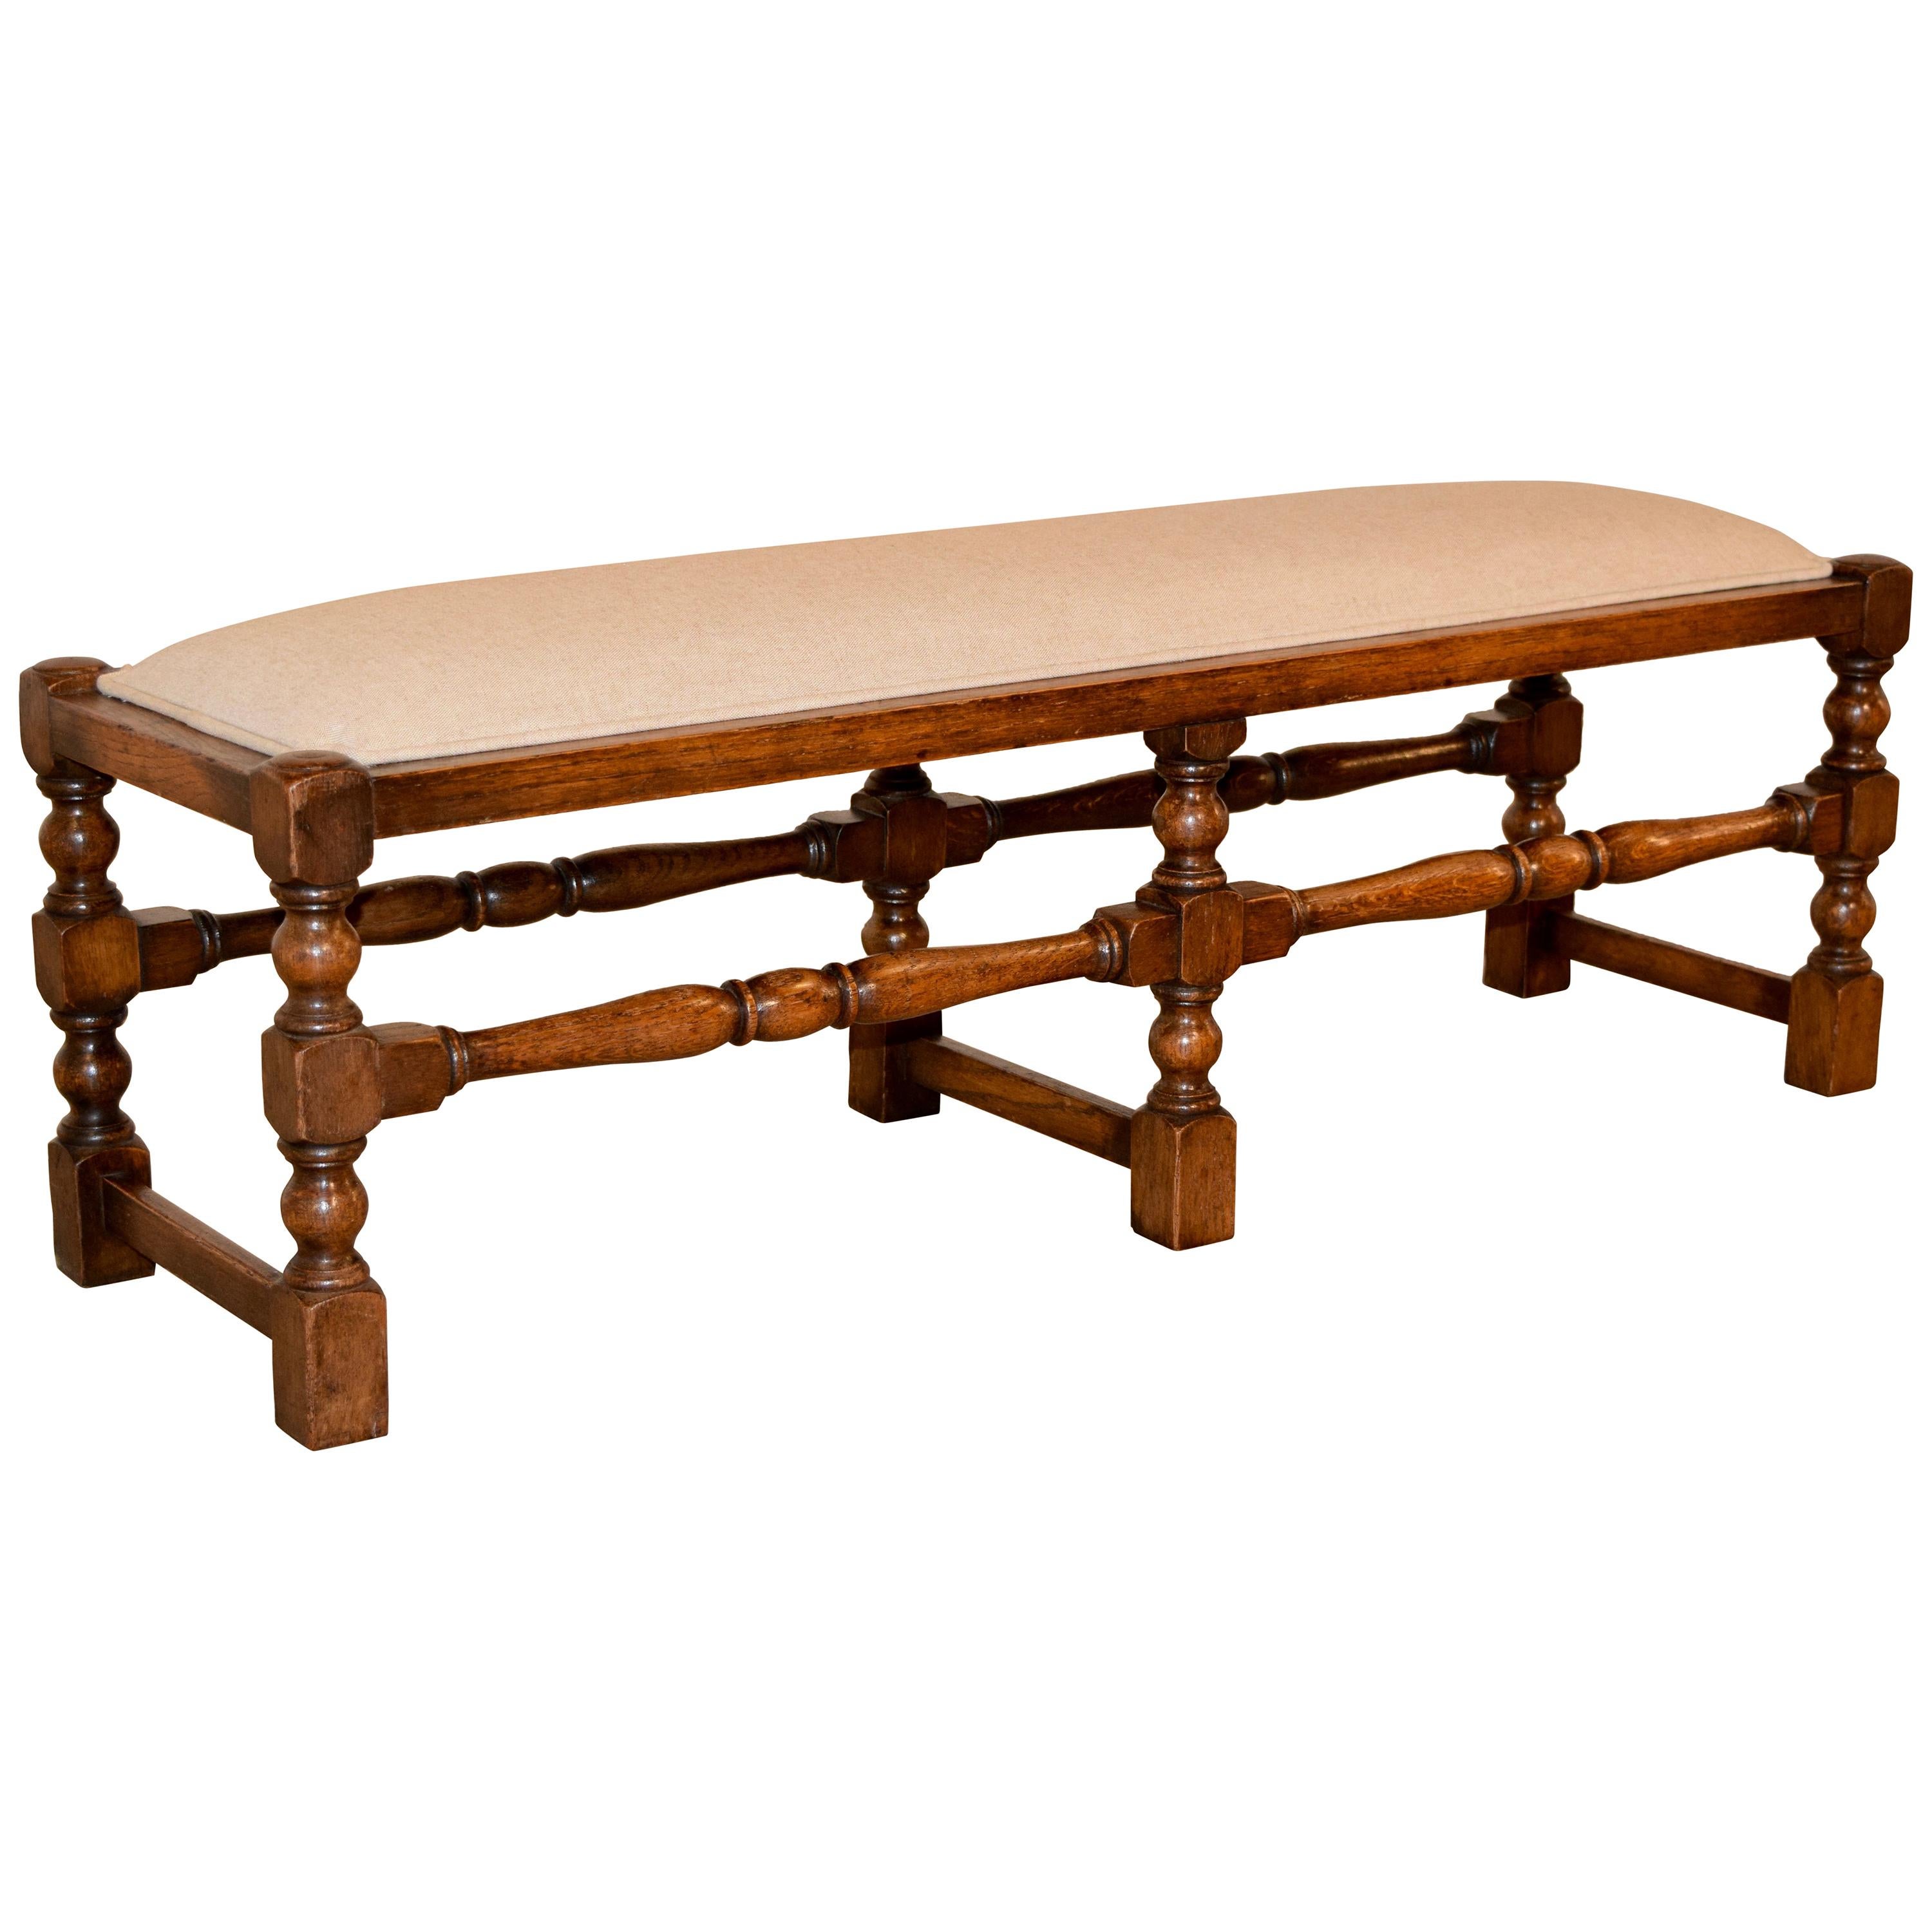 19th Century English Upholstered Low Bench